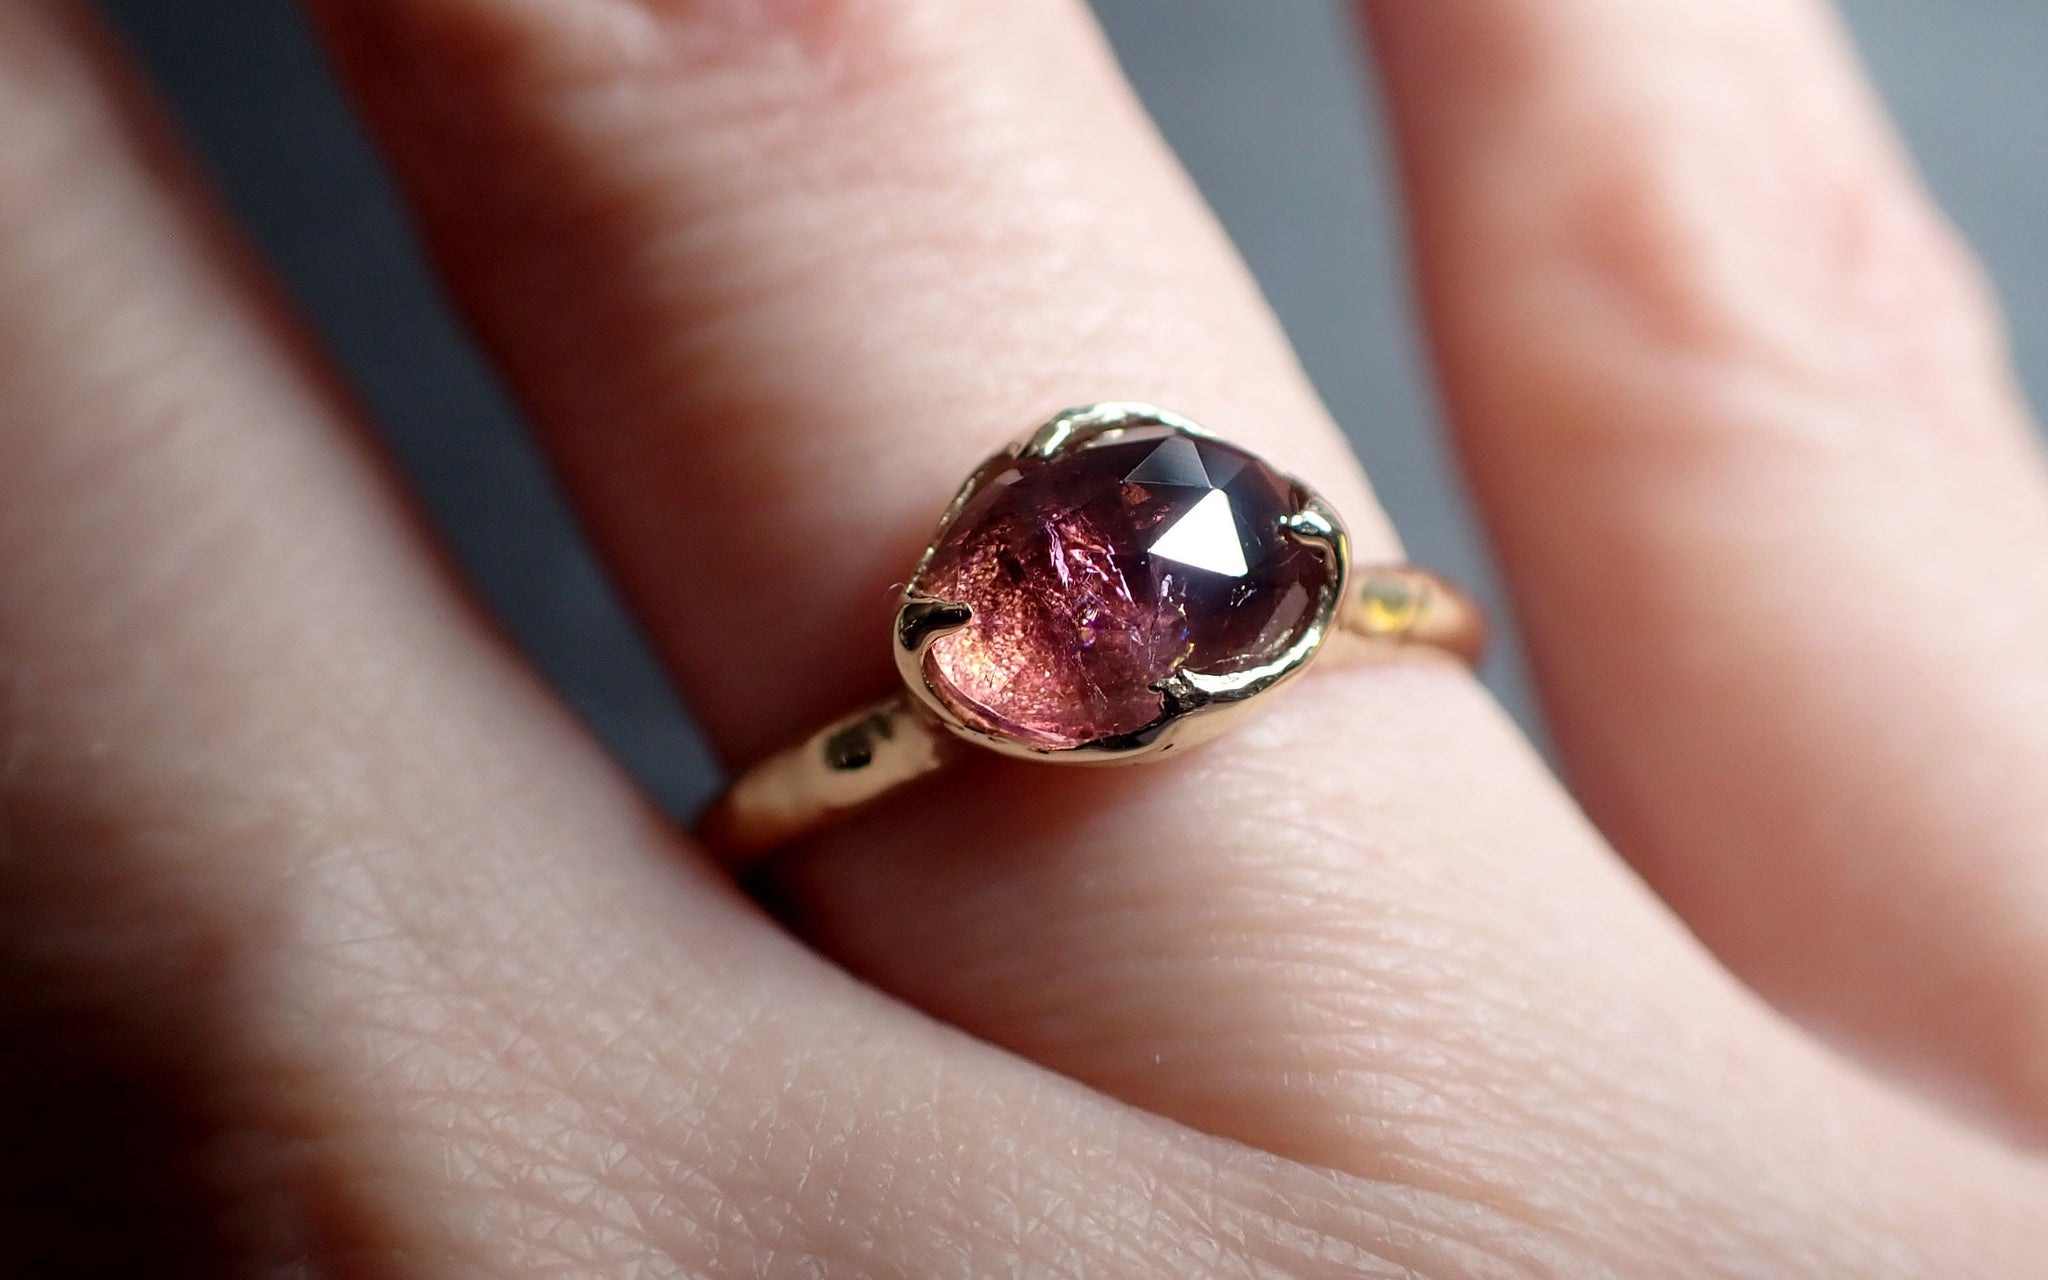 Fancy cut pink Tourmaline Gold Ring Gemstone Solitaire recycled 14k yellow gold statement 3313